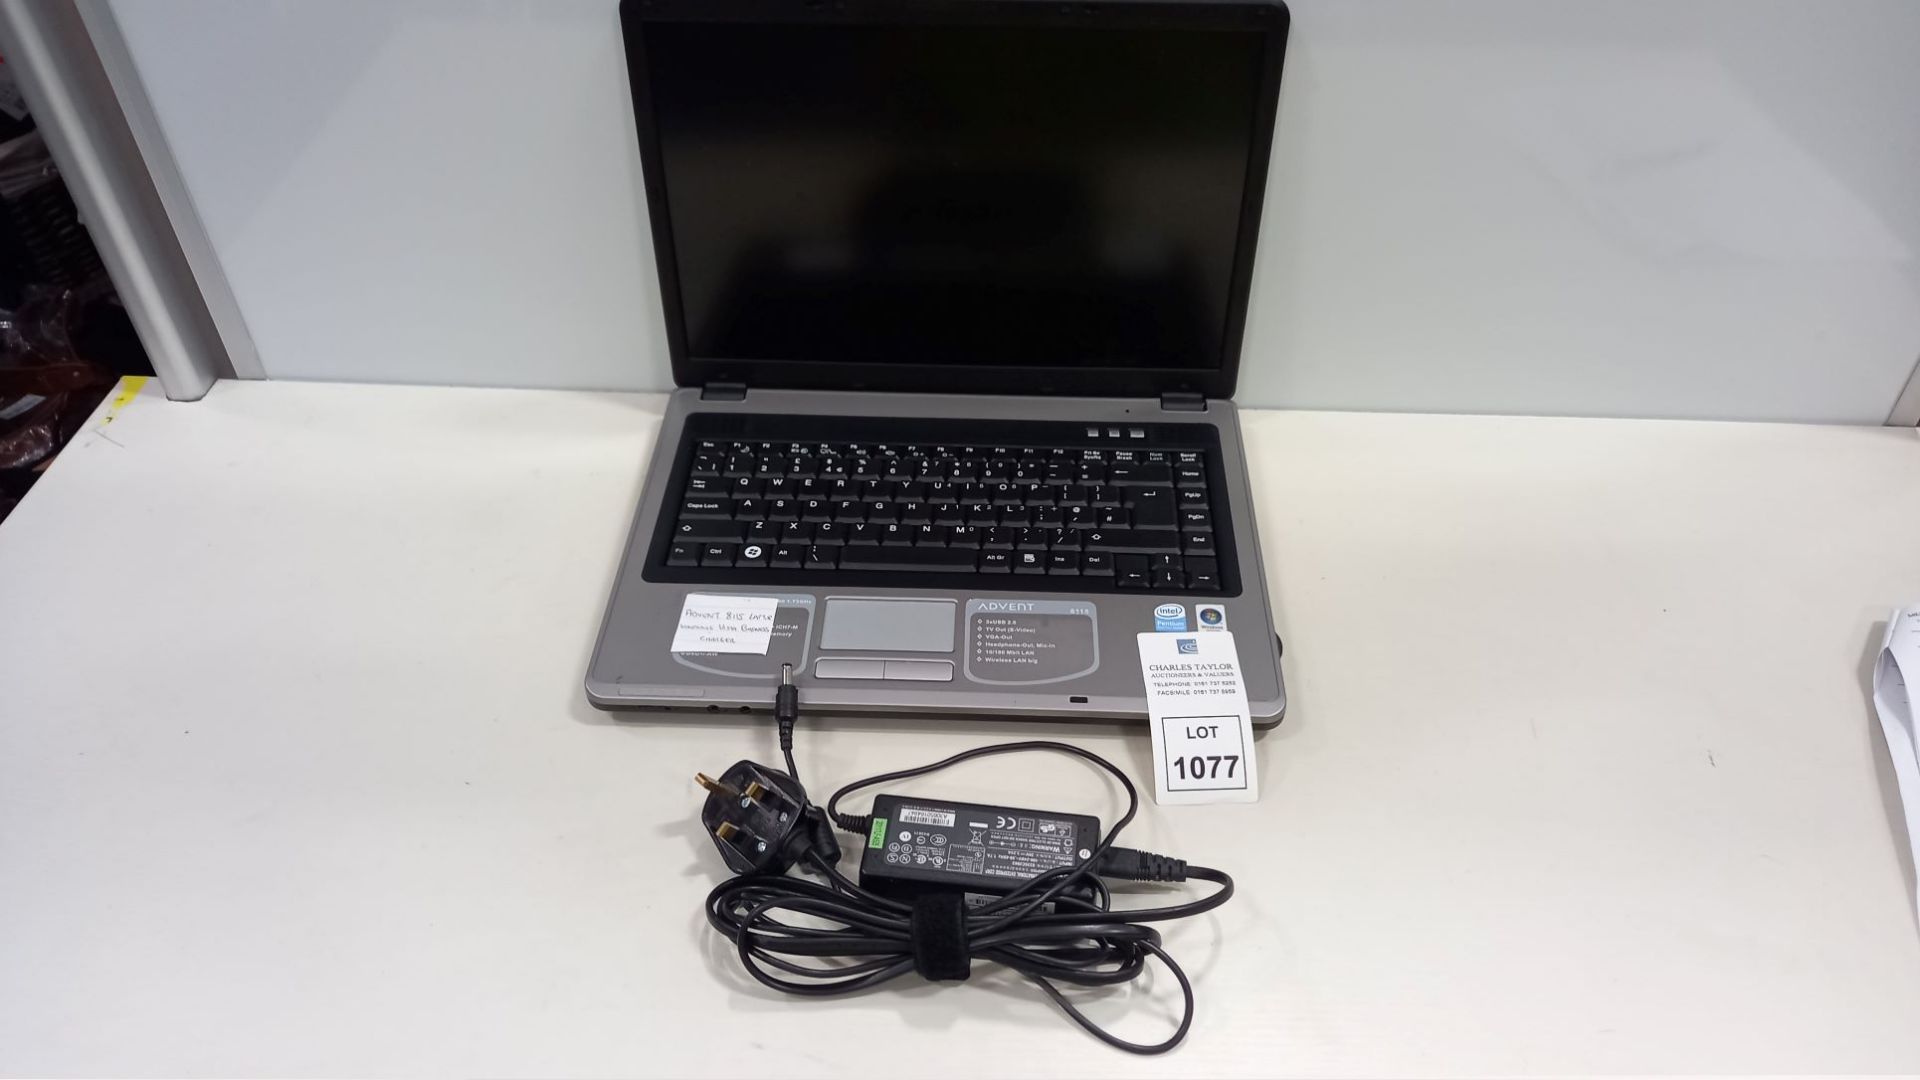 ADVENT 8115 LAPTOP WINDOWS VISTA BUSINESS - WITH CHARGER